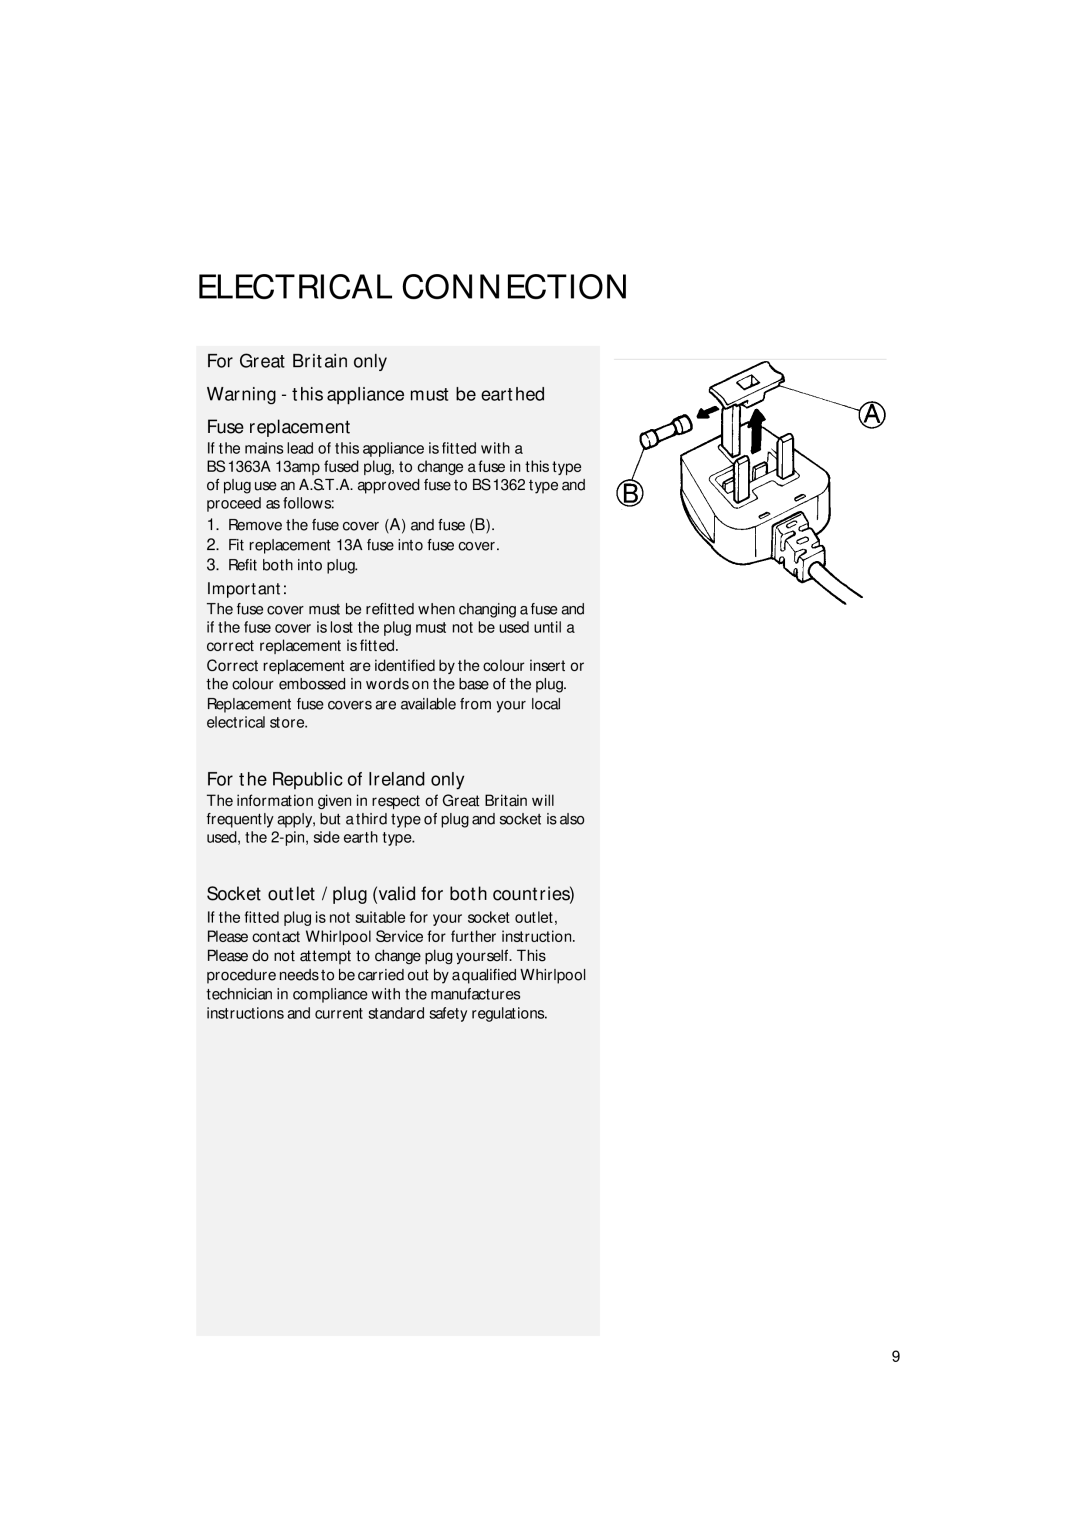 CDA FW350 manual Electrical Connection, For Great Britain only Warning - this appliance must be earthed, Fuse replacement 